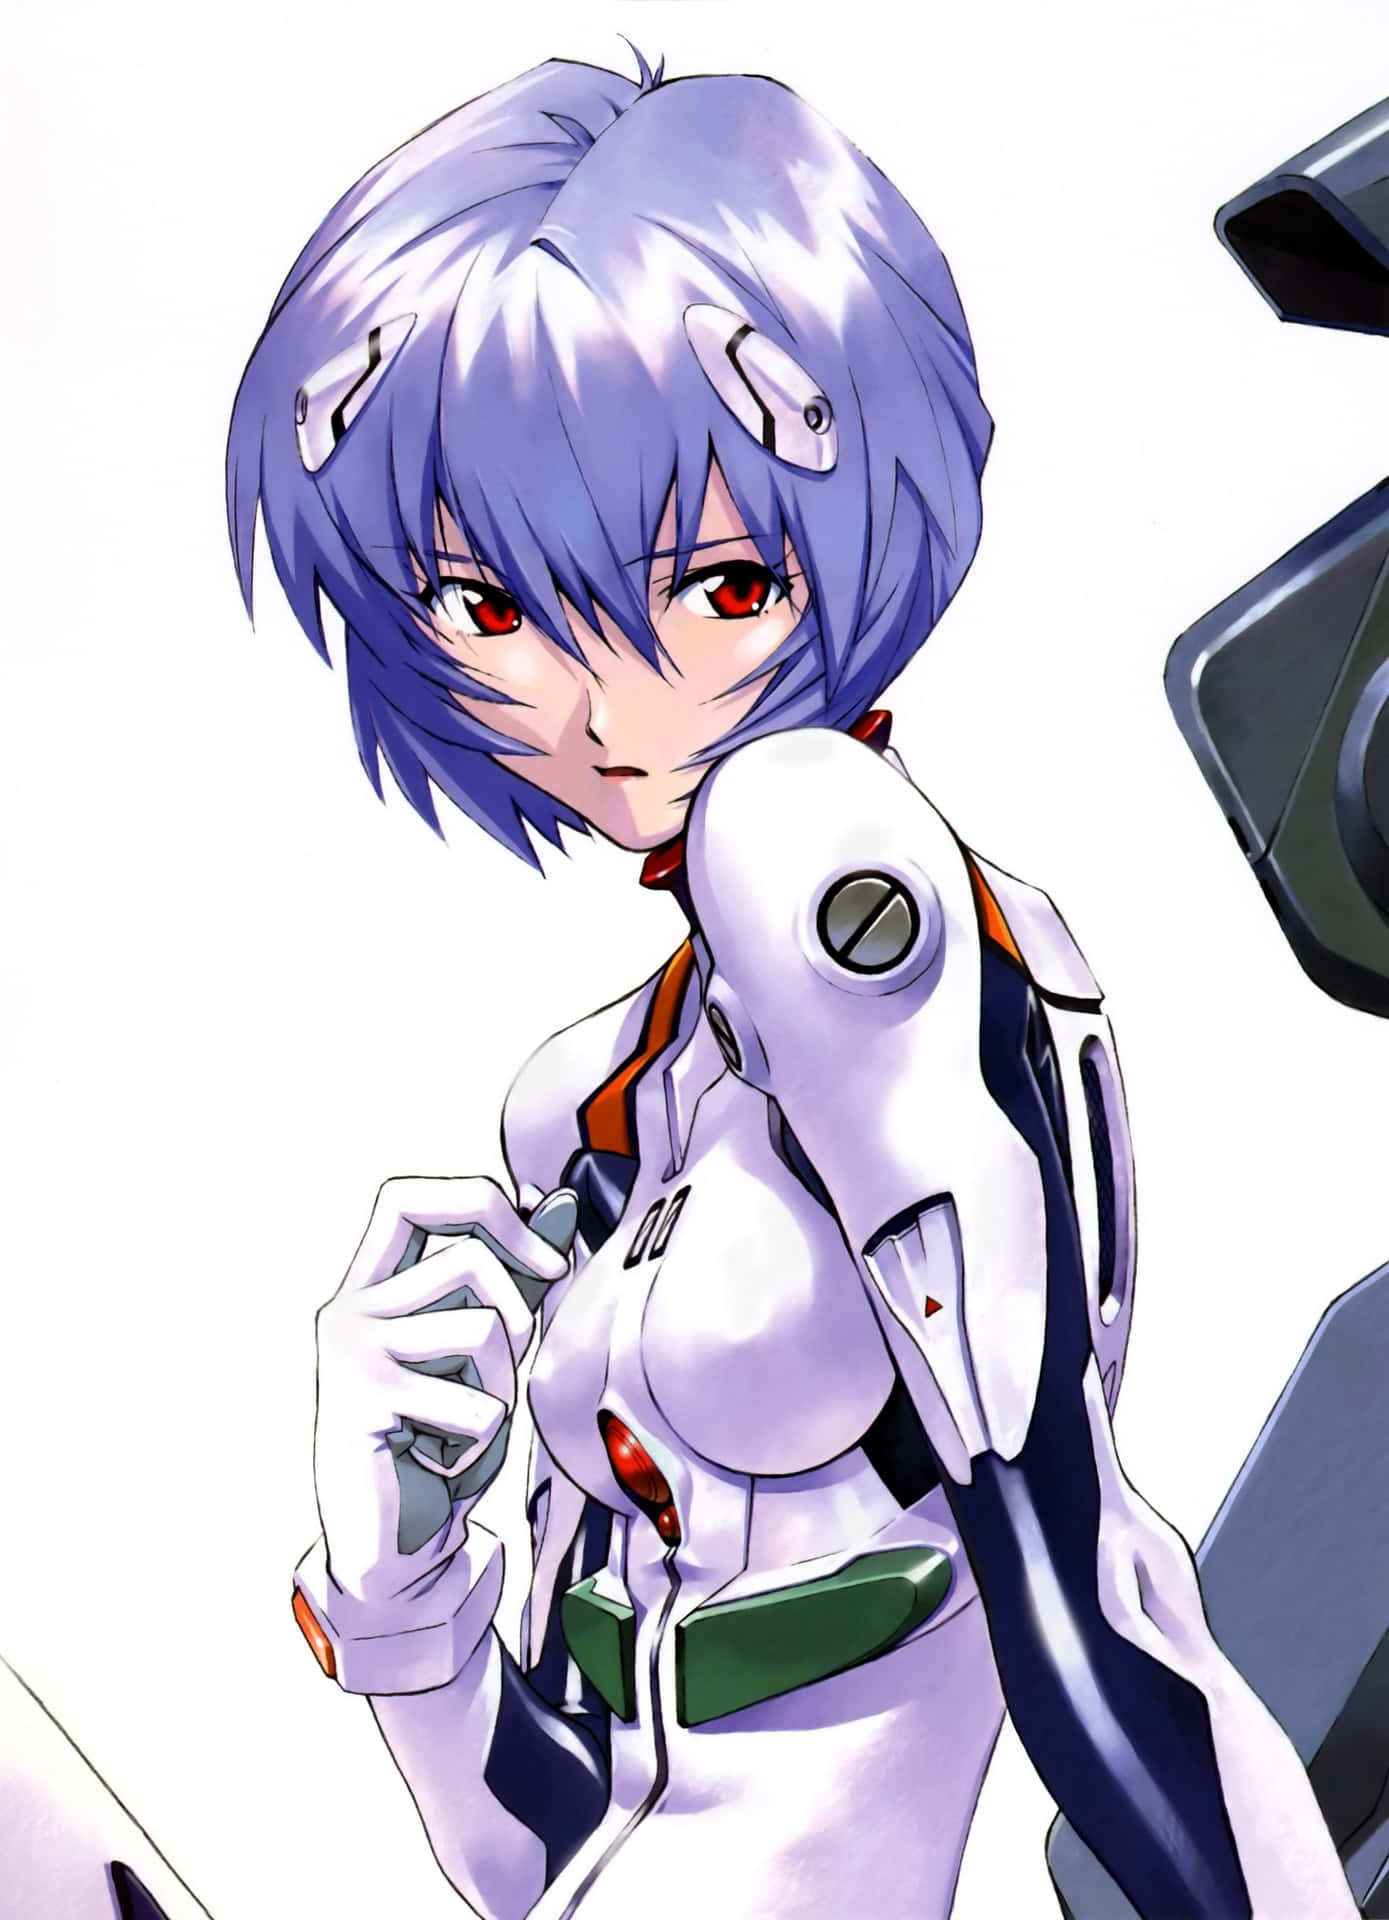 Rei Ayanami in her iconic plugsuit Wallpaper